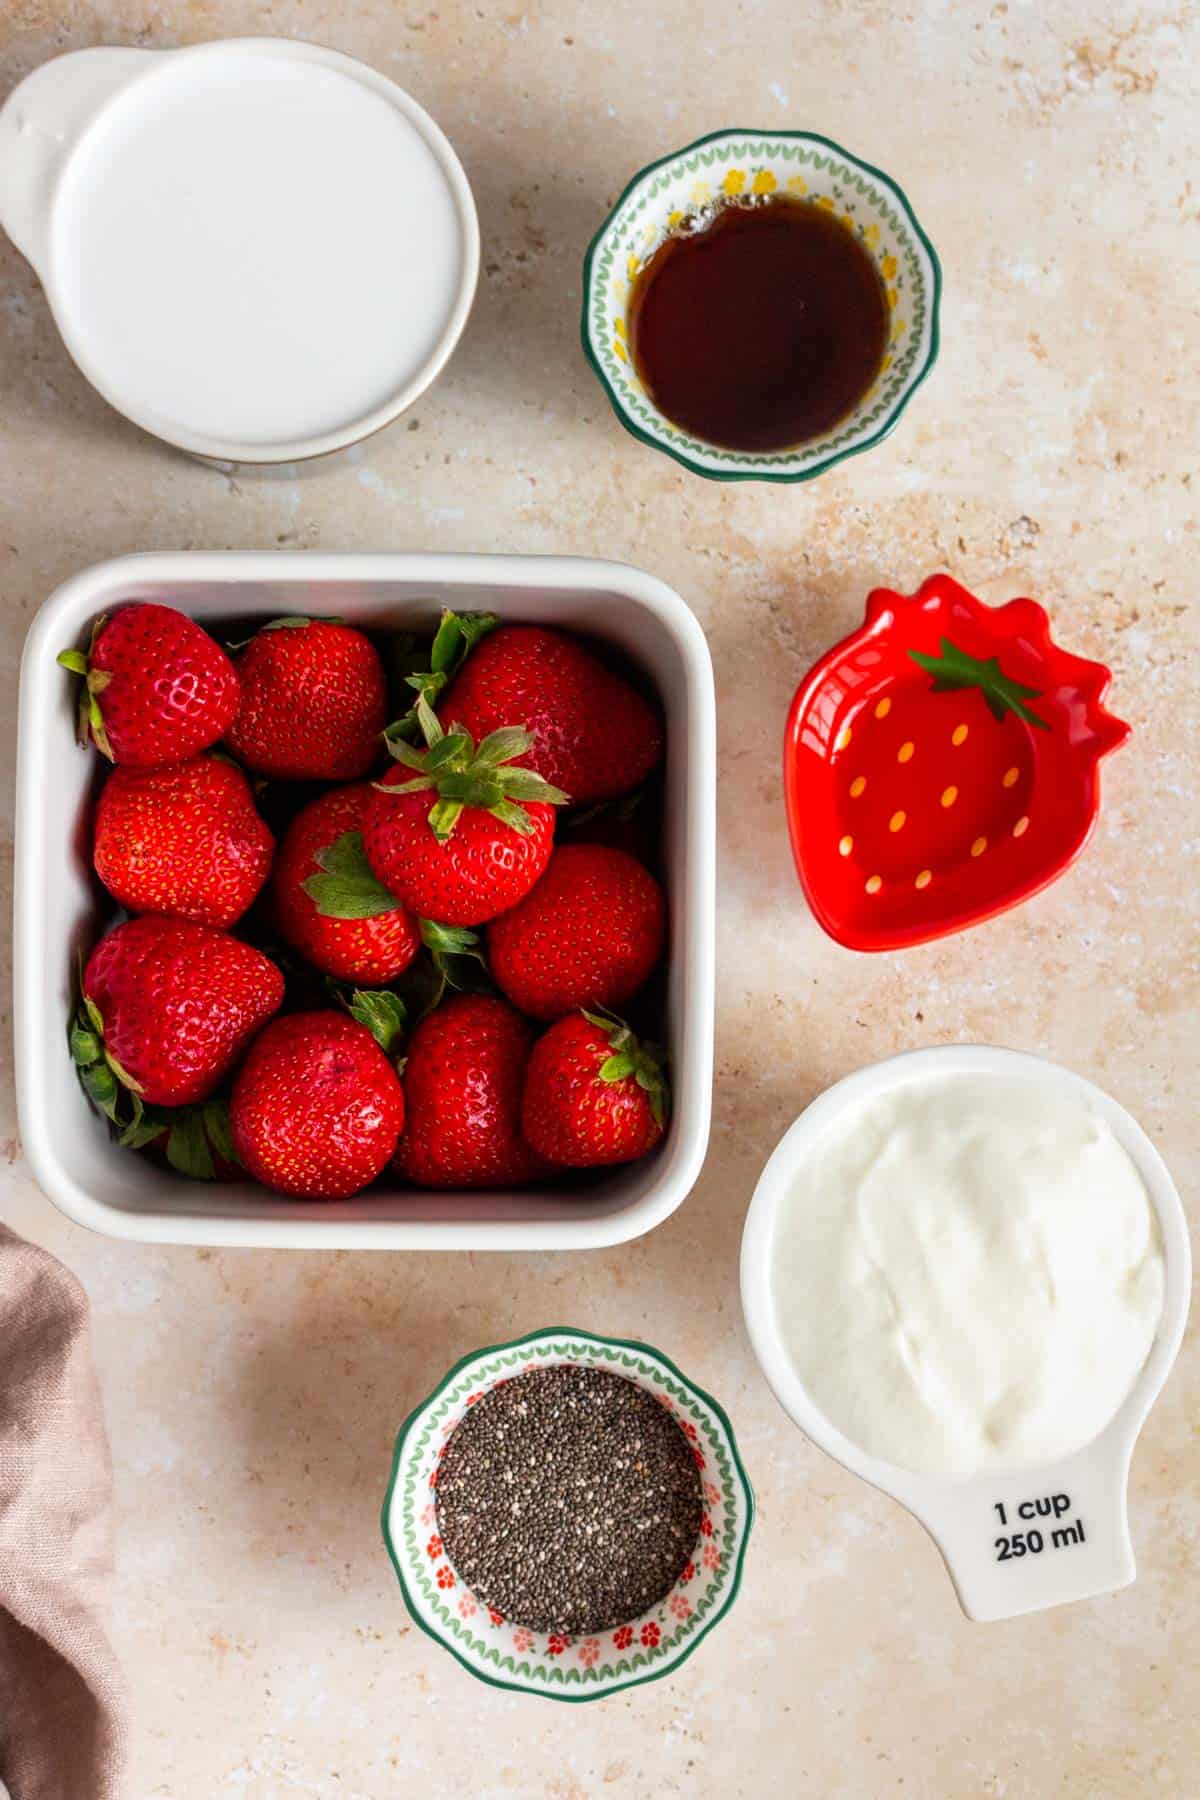 Ingredients needed to make strawberry chia pudding.